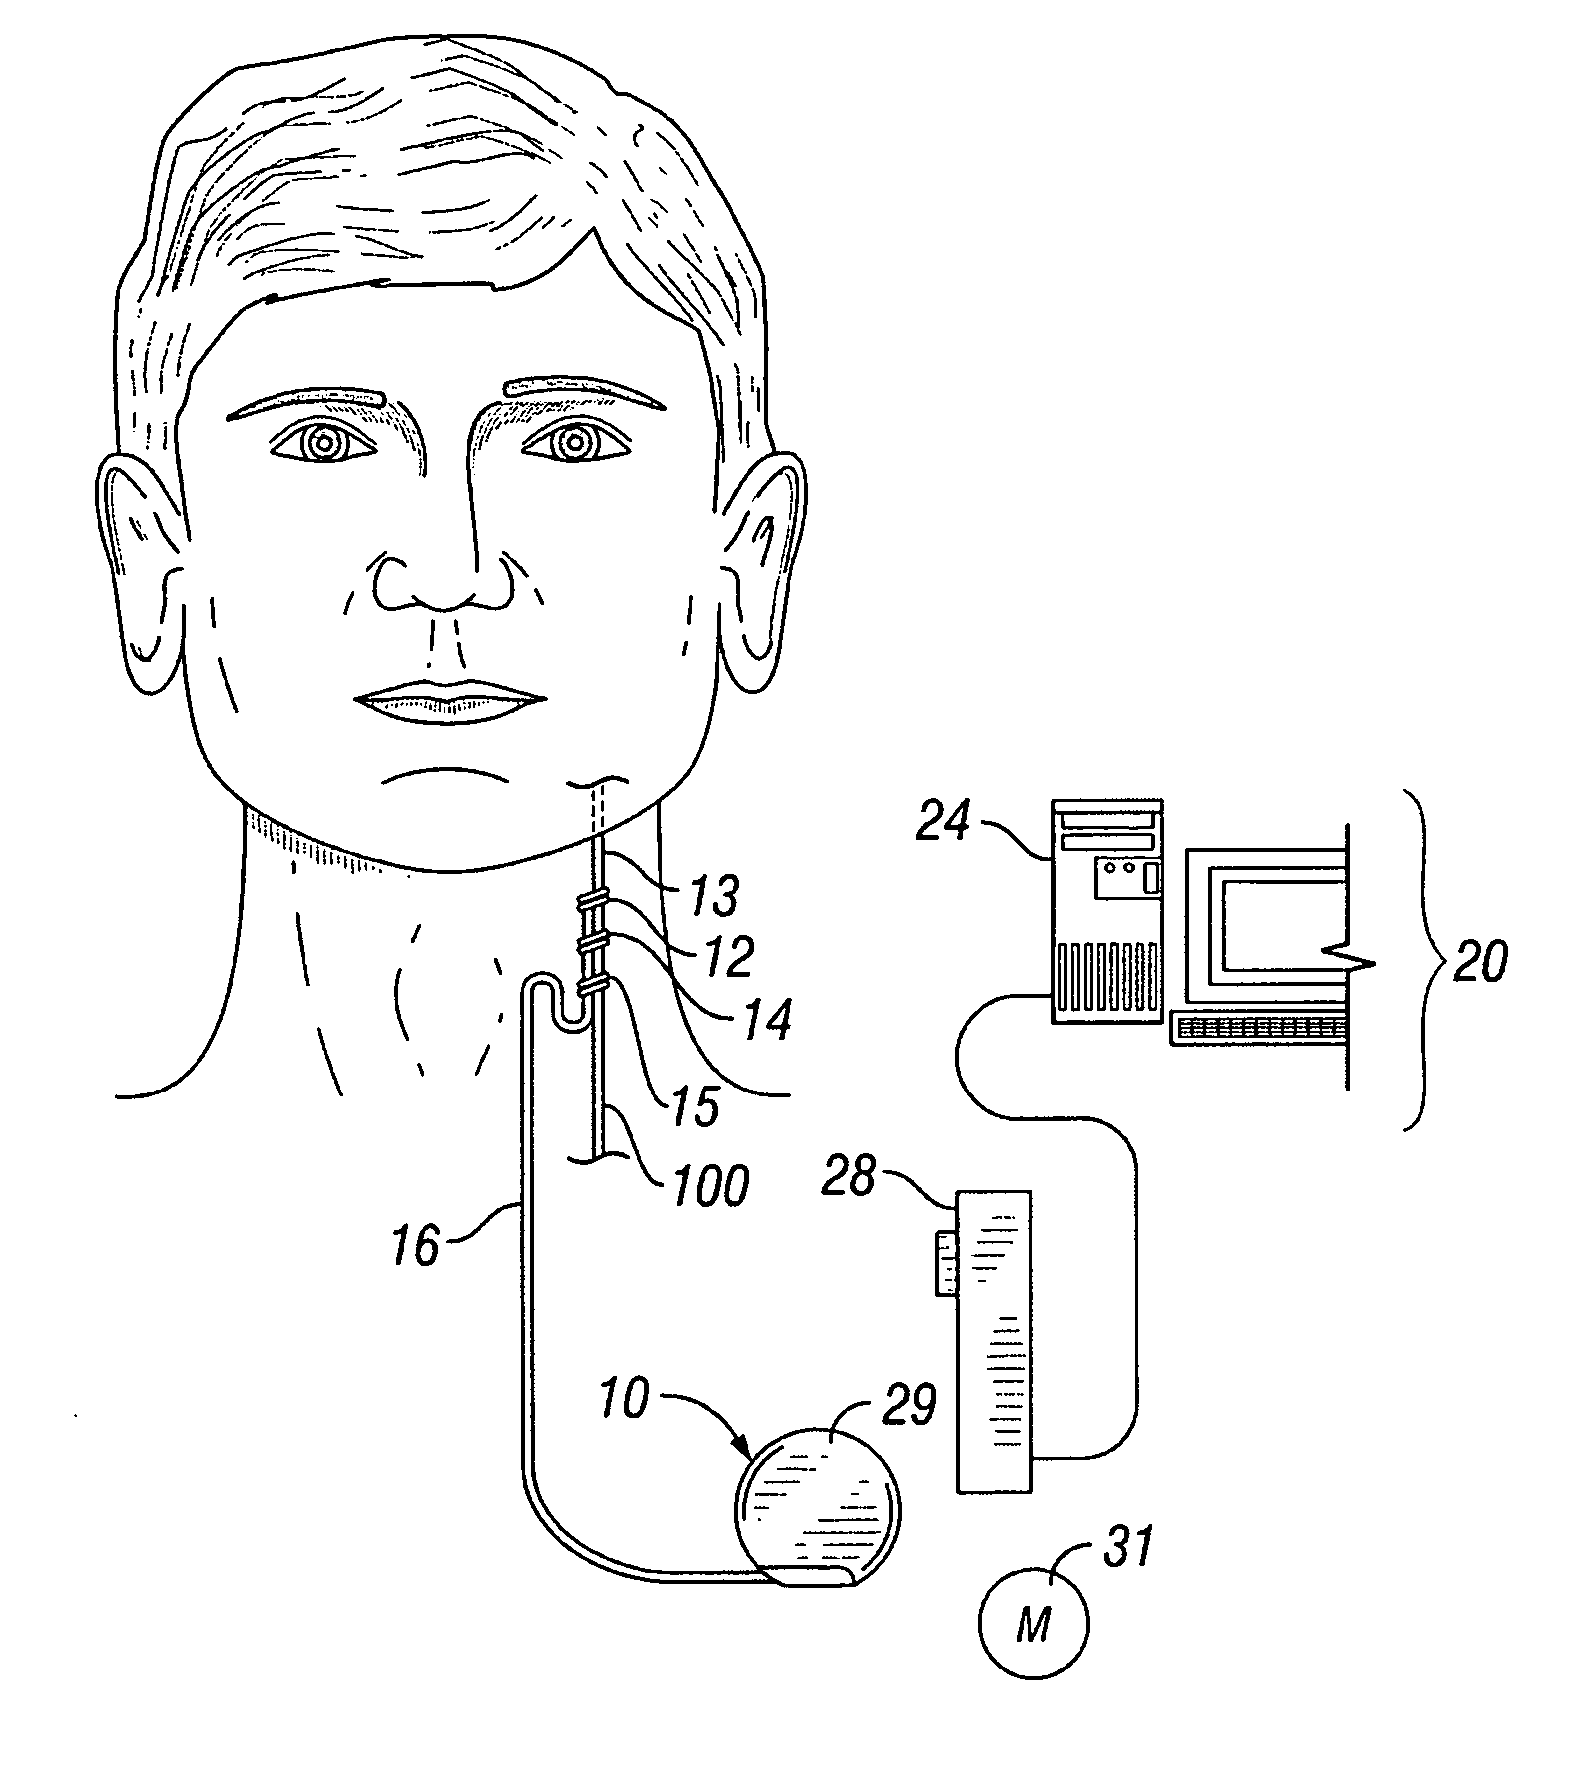 Sequenced therapy protocols for an implantable medical device